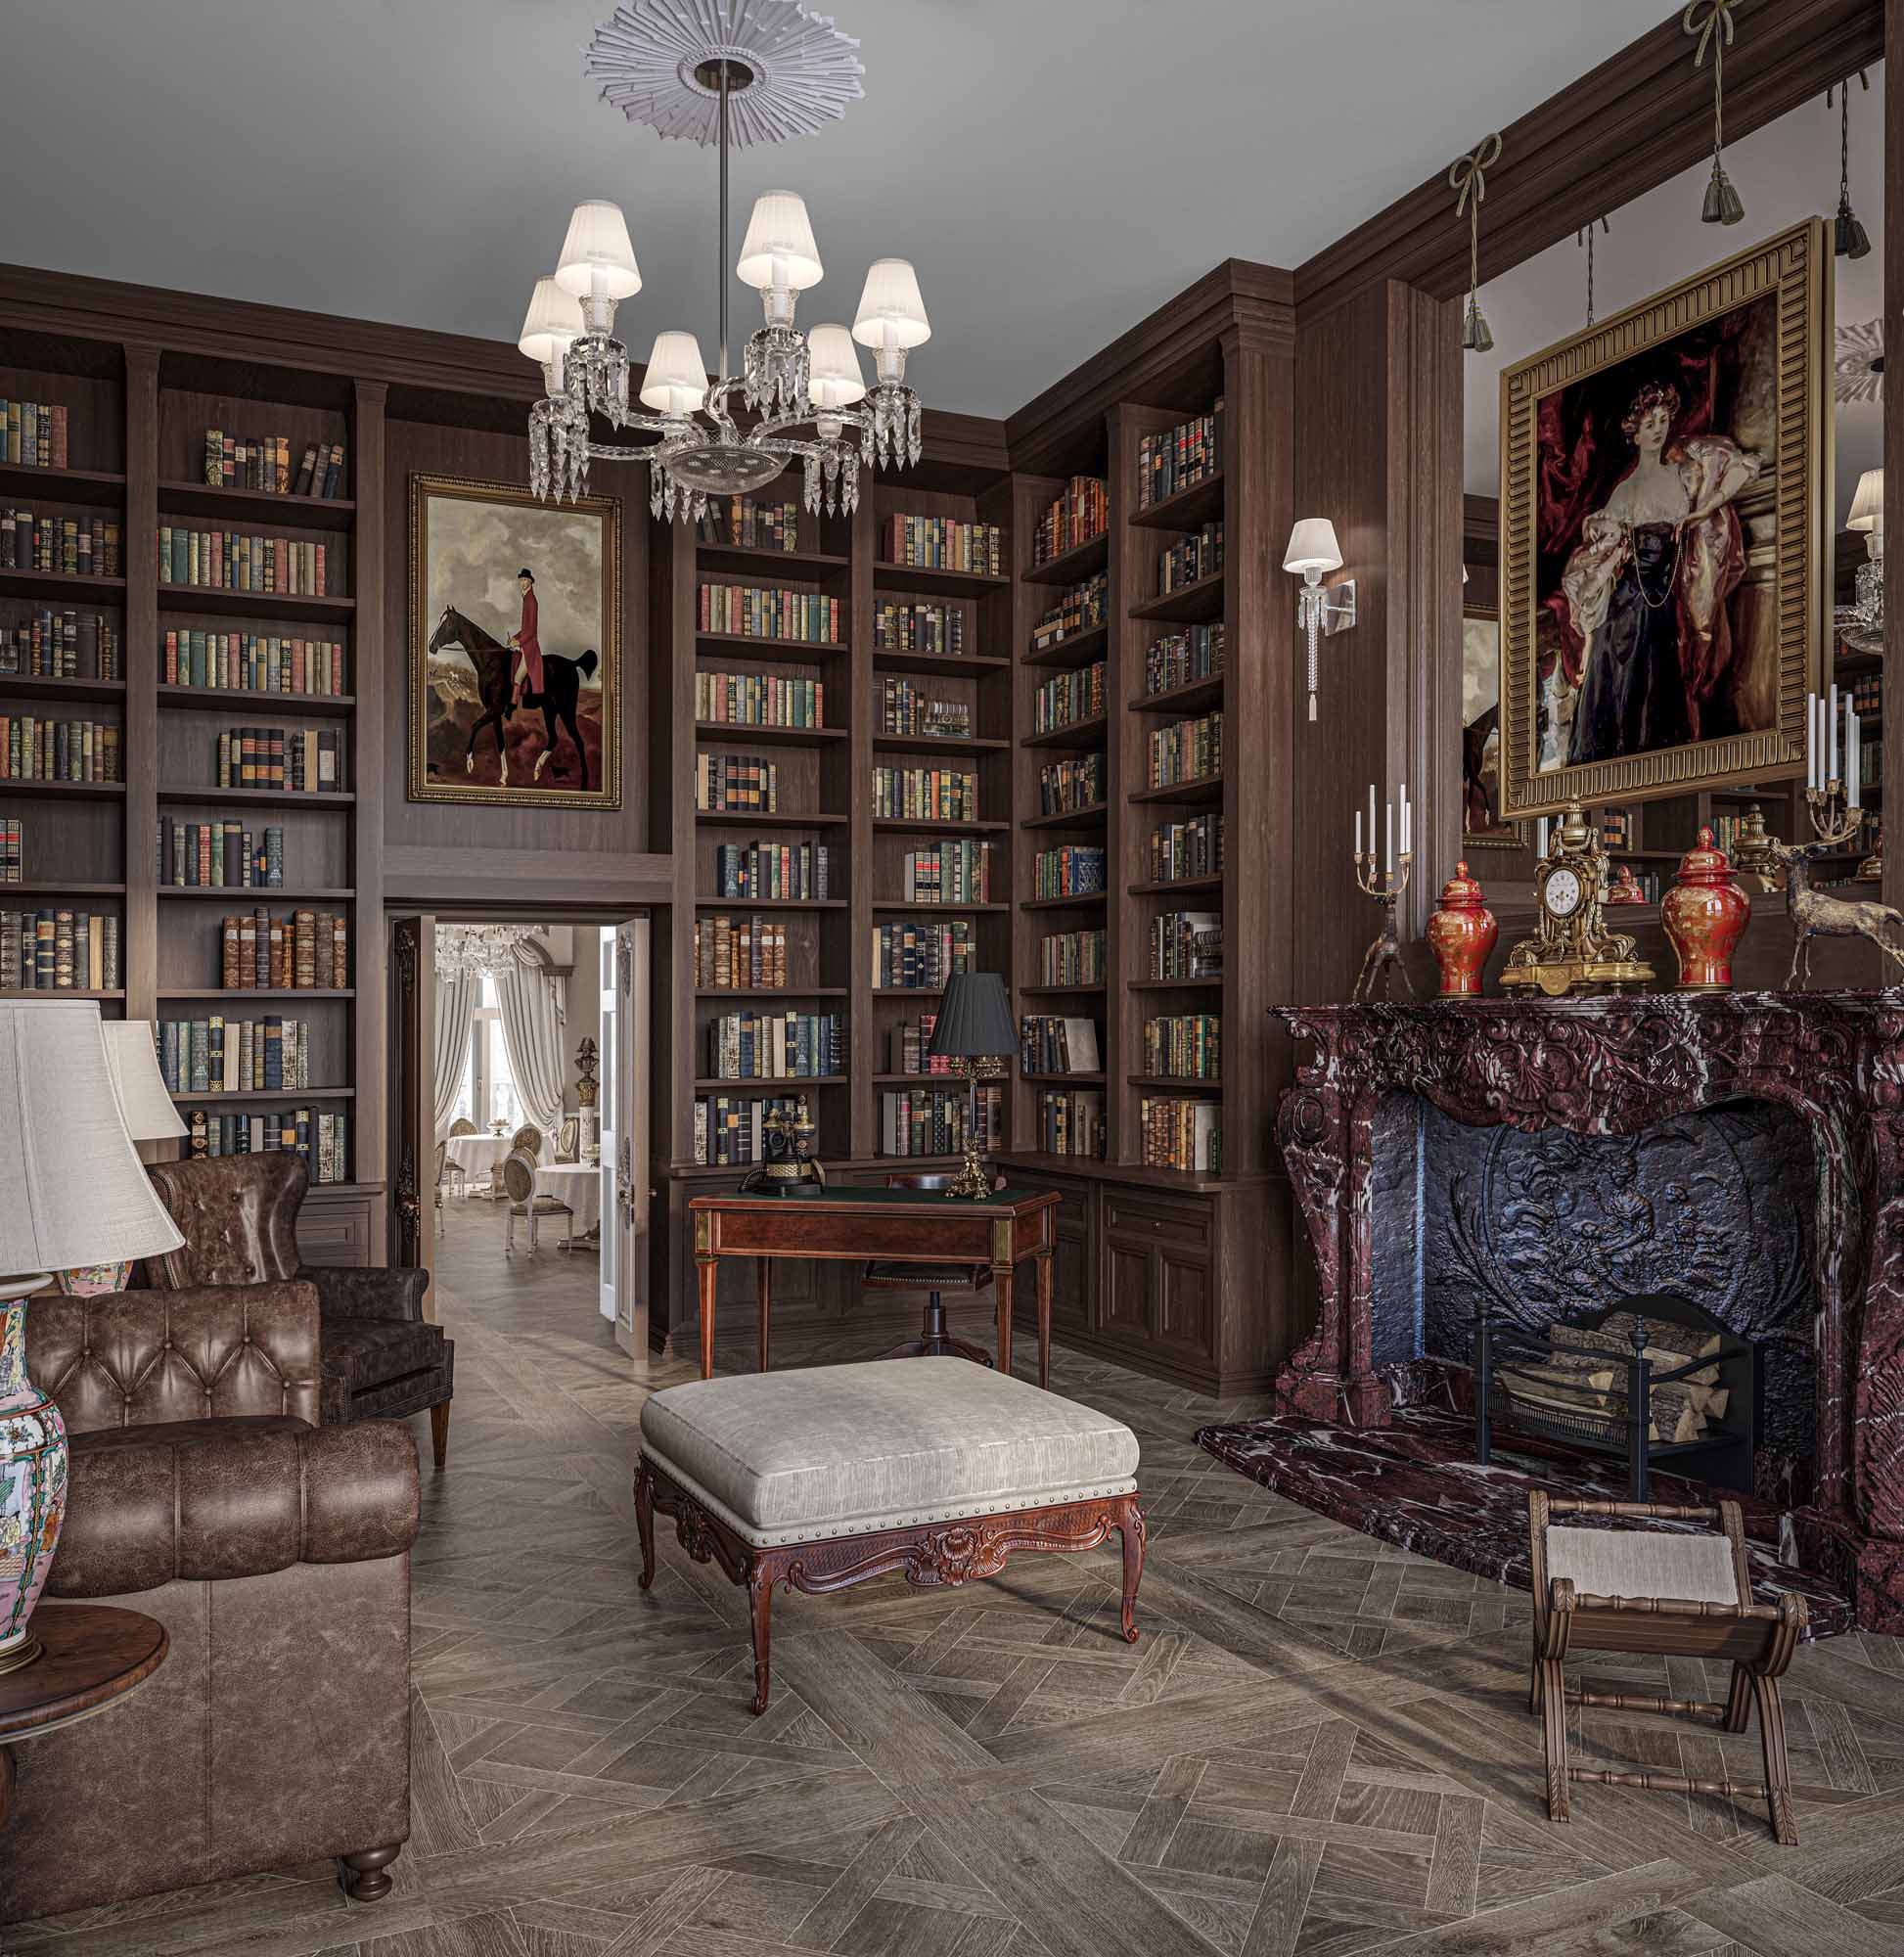 Lord Byron's Mayfair mansion listed at £29.5M with £70M potential post-renovation